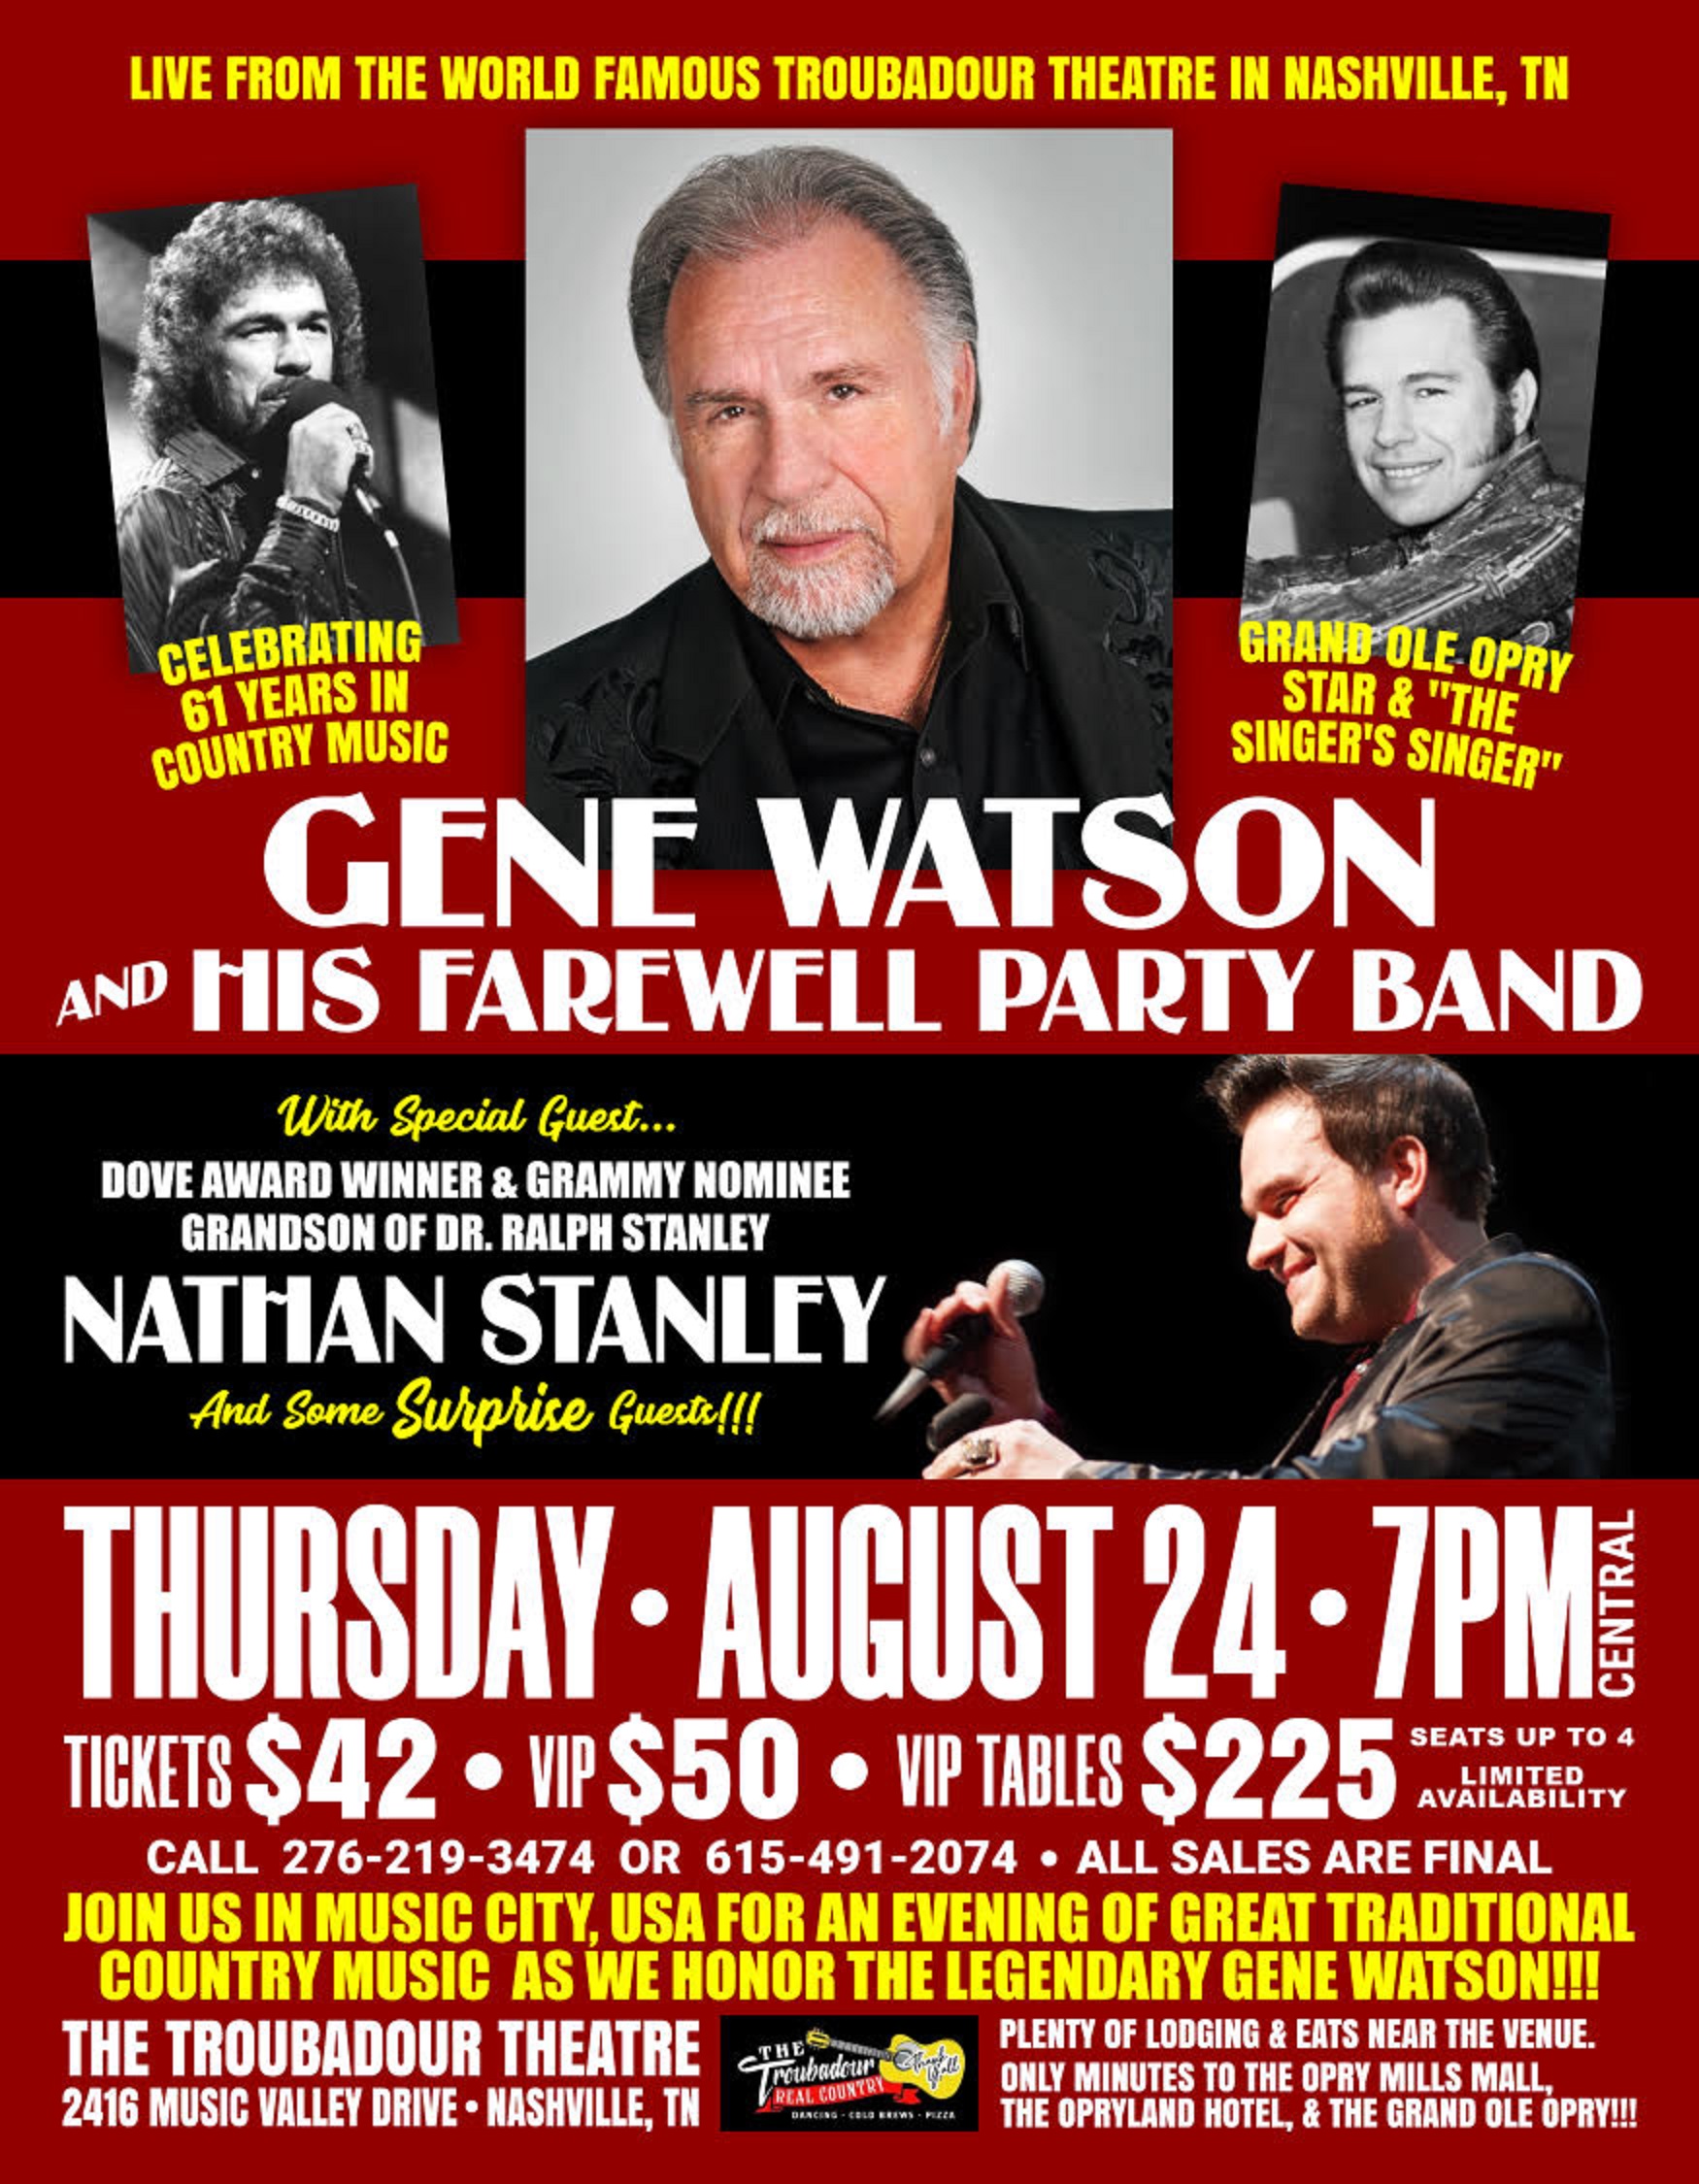 Gene Watson Celebrates 61 Years In Country Music With Headlining Show at The Texas Troubadour Theatre in Nashville